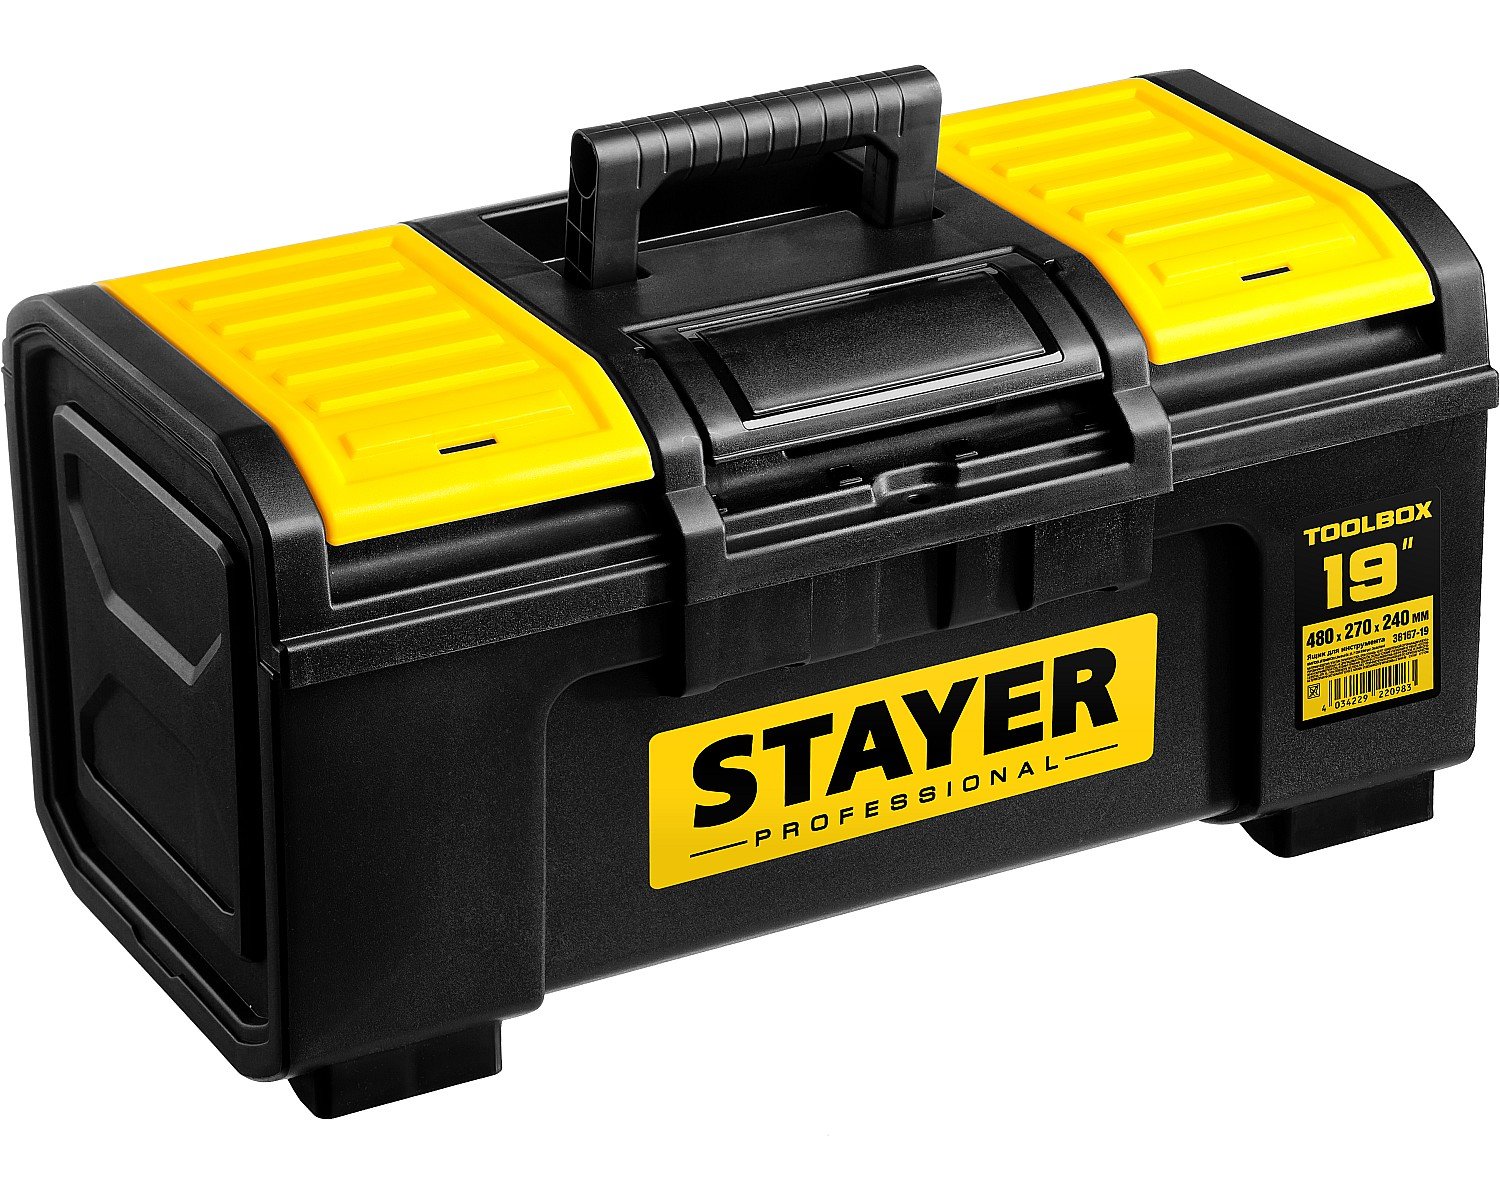     STAYER TOOLBOX-19 480  270  240 (38167-19)